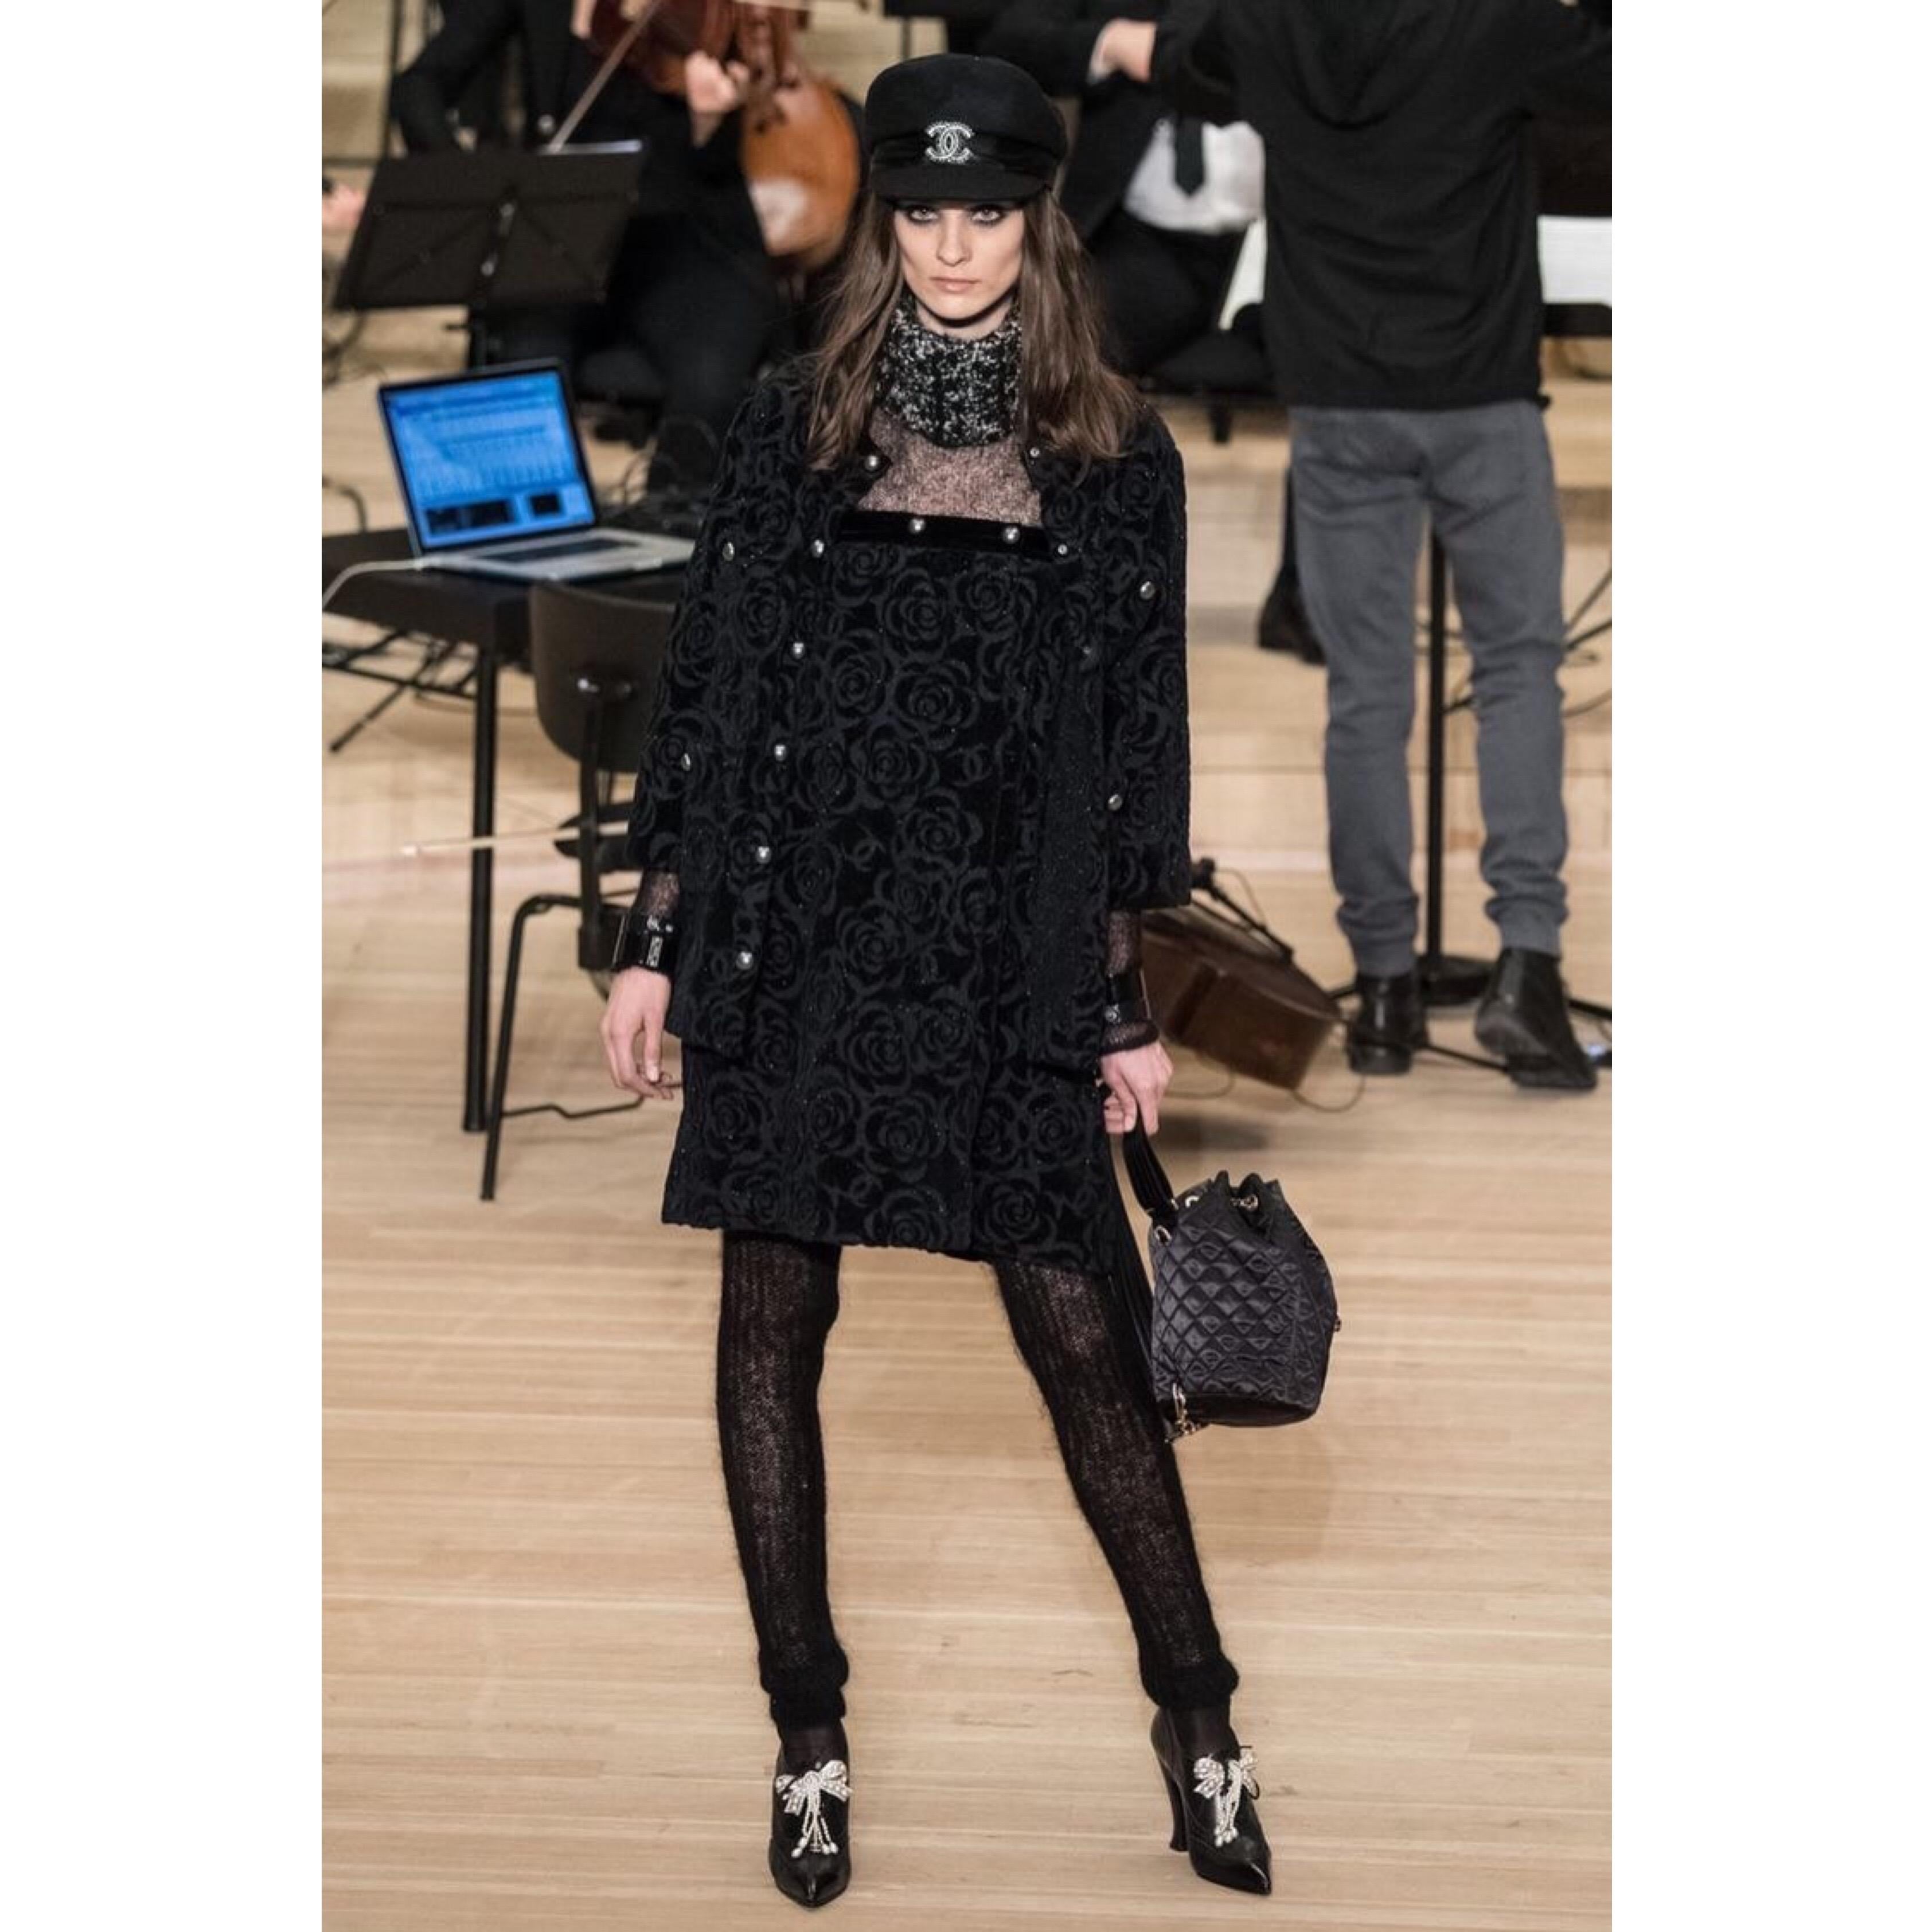 Chanel in the early days of establishing her house was deeply inspired by seafaring and the lifestyle of the French Riviera. In the Pre-Fall 2018 Métiers d’Art collection, Karl Lagerfeld took to his own roots of his hometown of Hamburg and created a